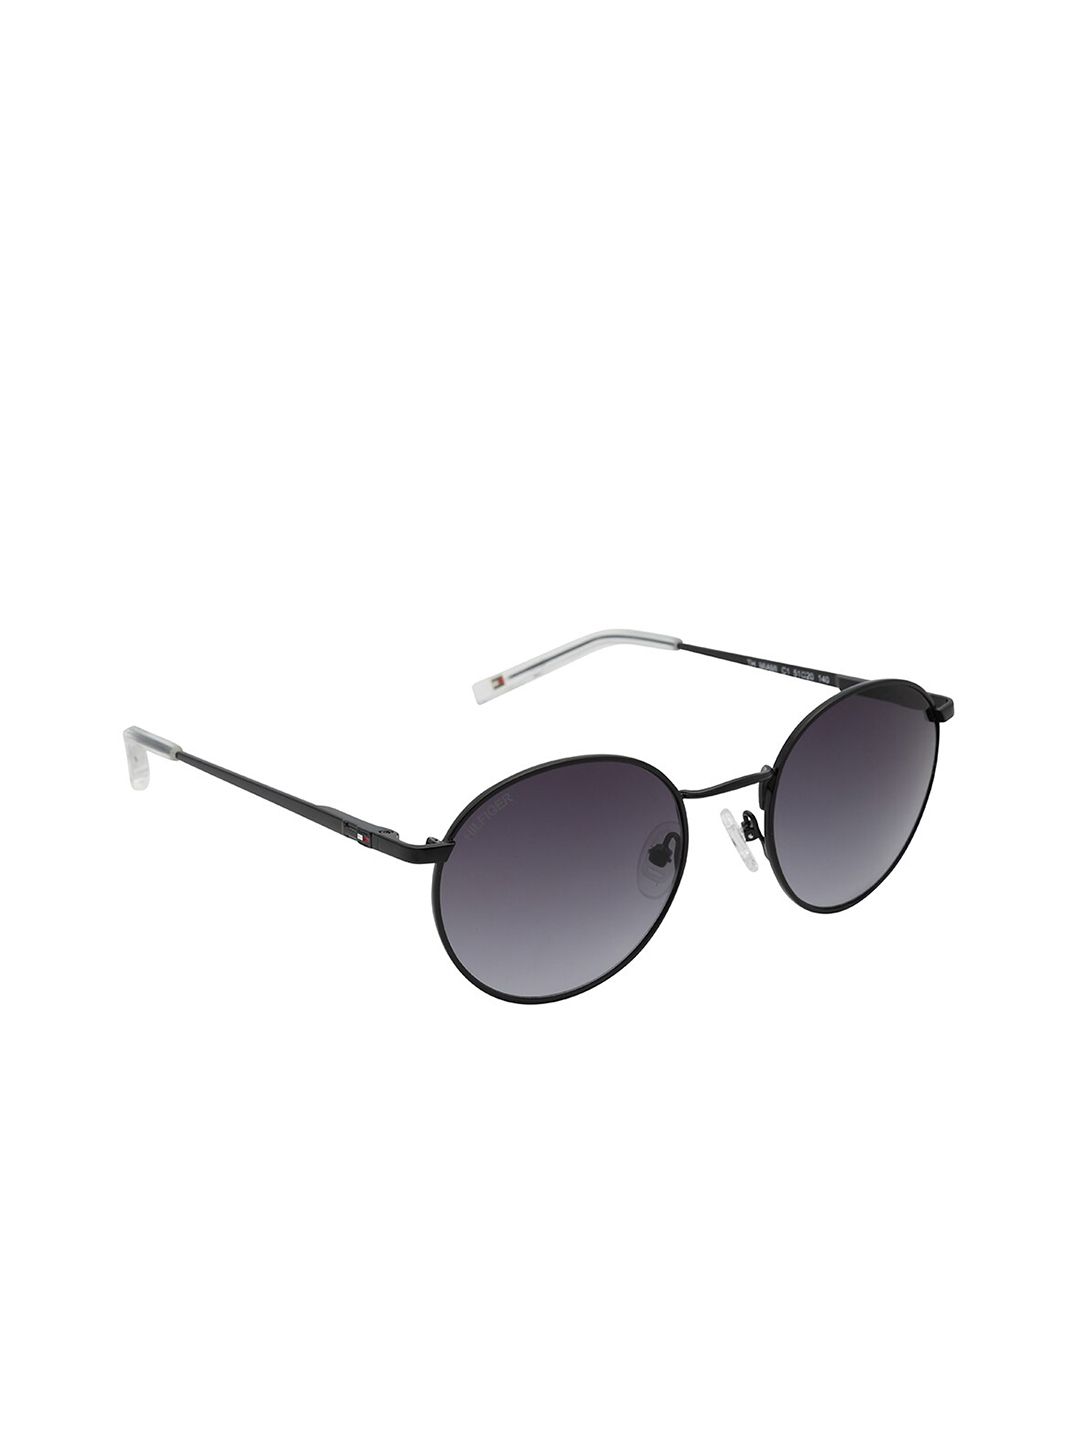 Tommy Hilfiger Grey Lens & Black Round Sunglasses with UV Protected Lens TH Miami C1 51 S Price in India